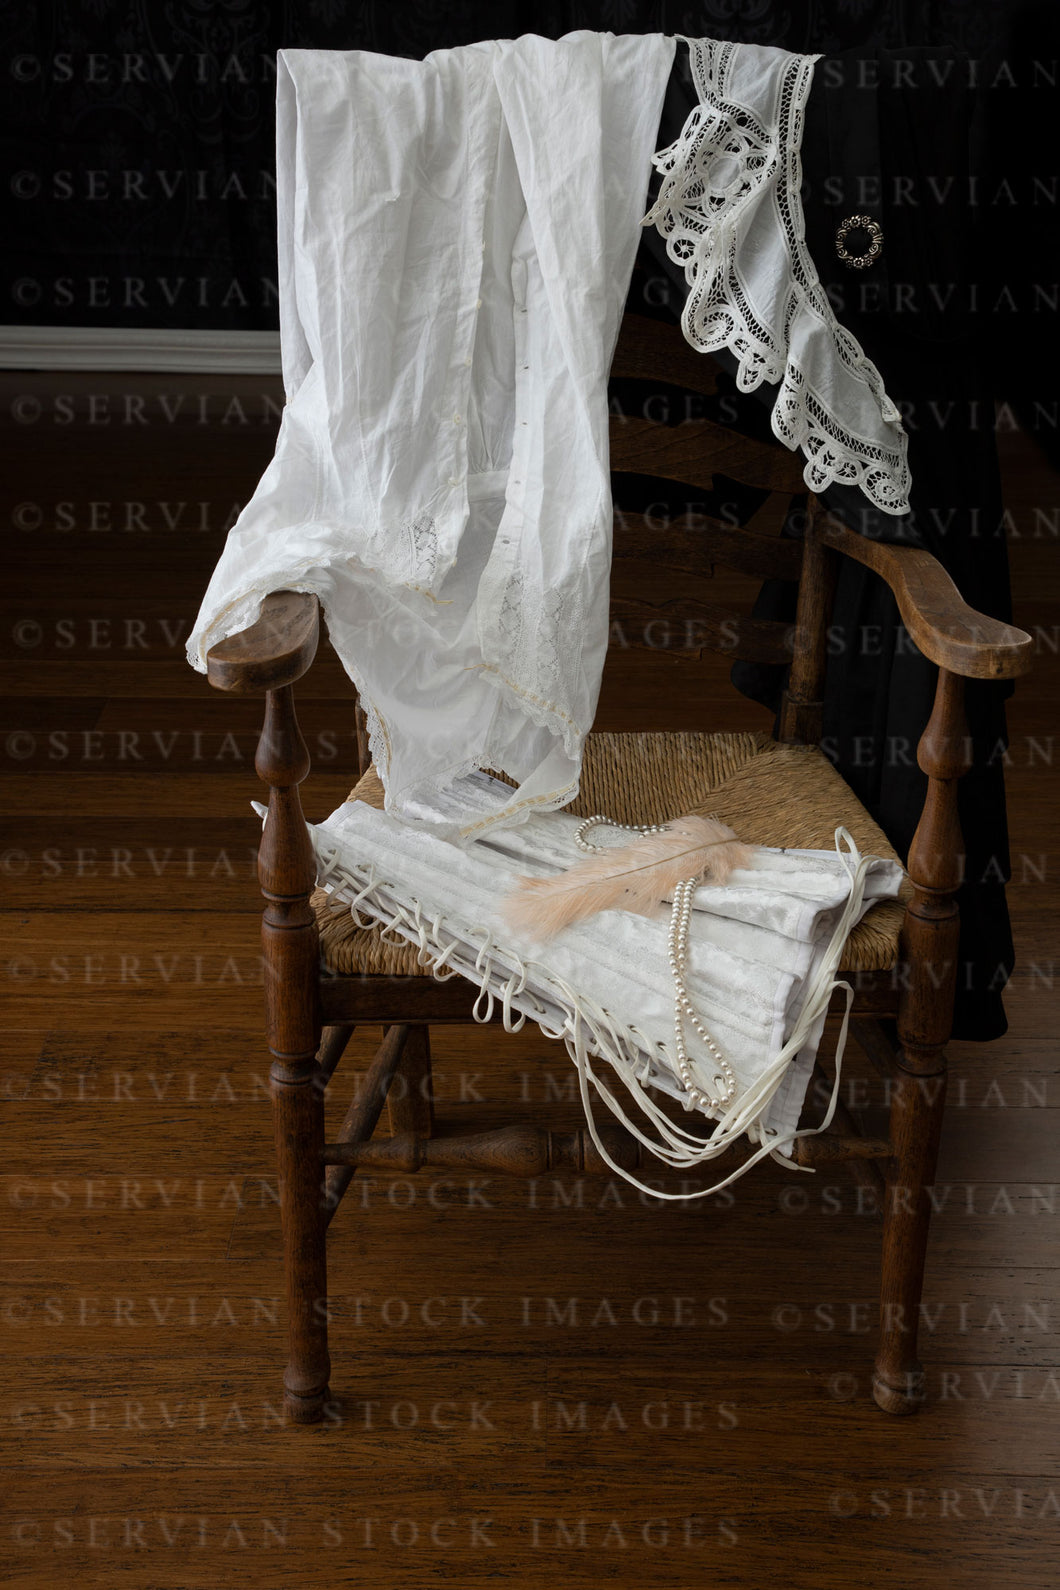 Still life -  Vintage clothes on a wooden chair  (KS0577)